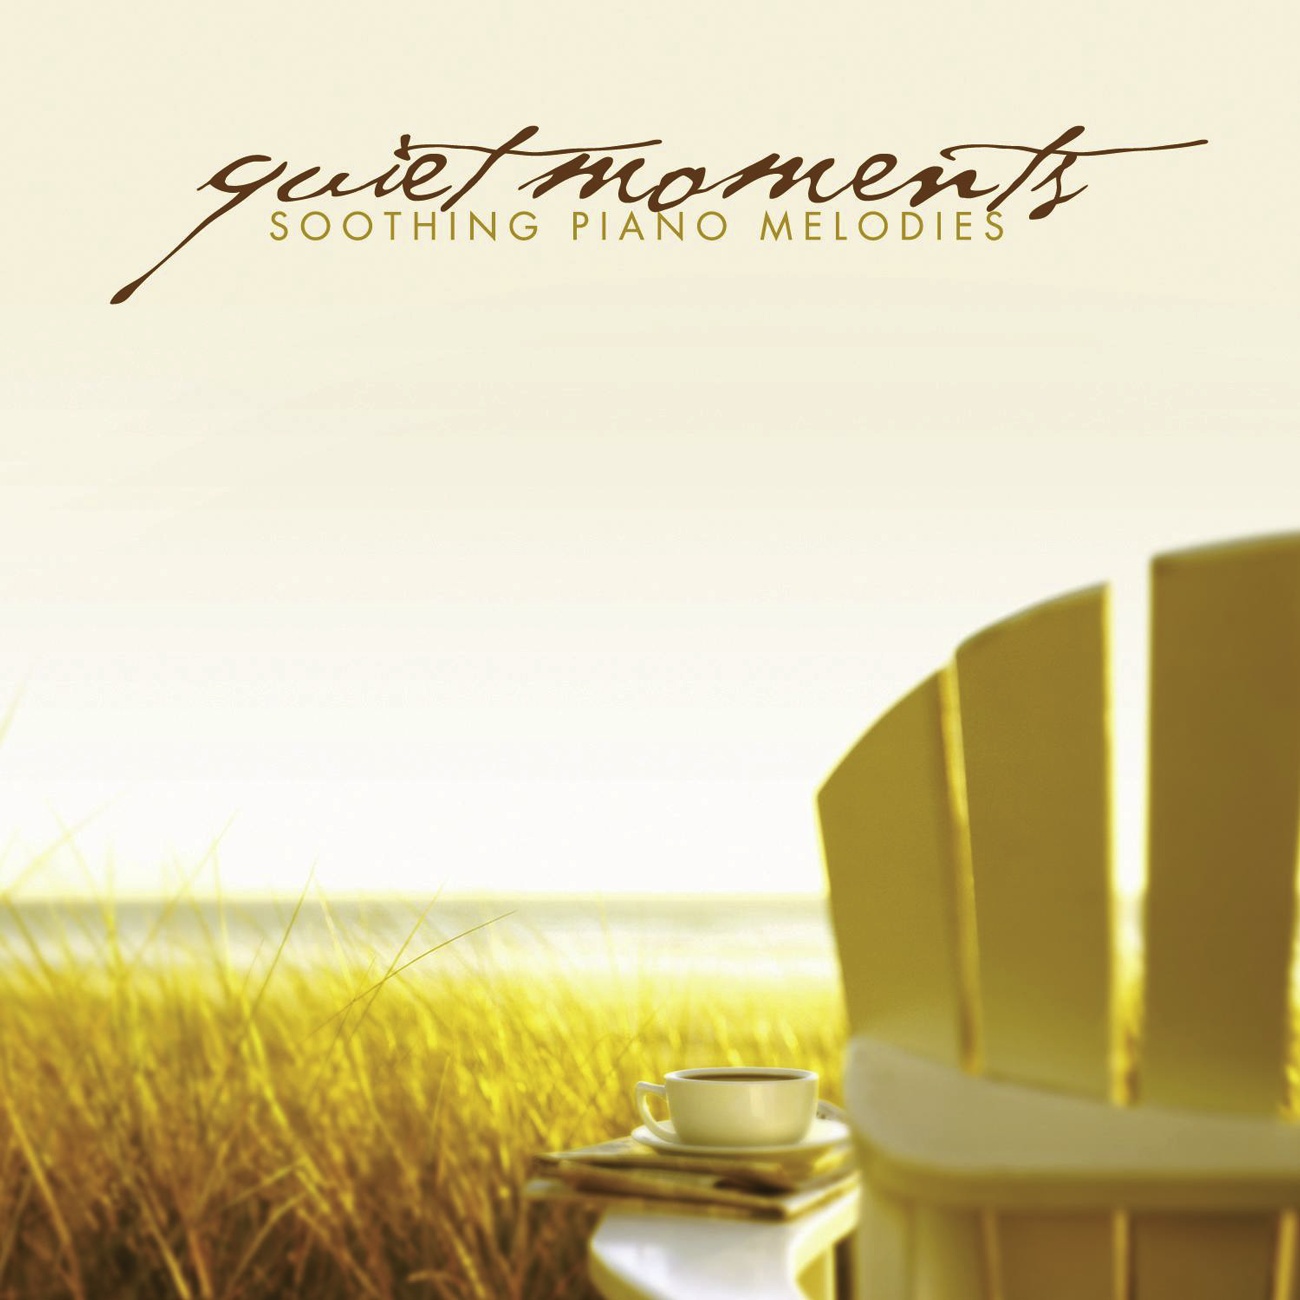 When You Wish Upon A Star (From Pinocchio) (Quiet Moments Album Version)